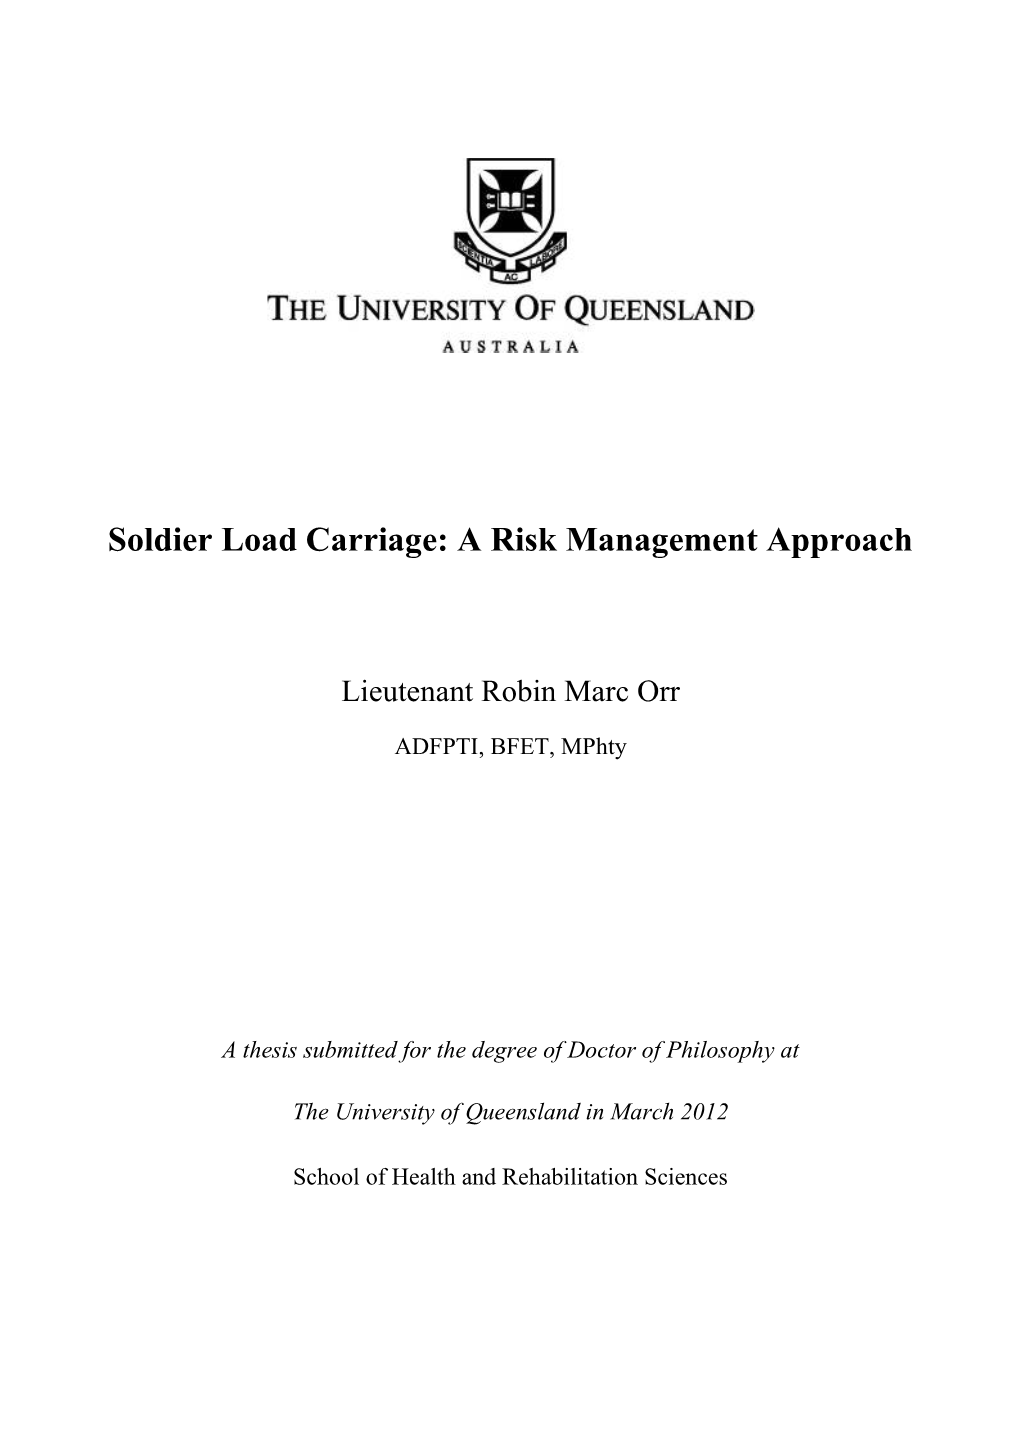 Soldier Load Carriage: a Risk Management Approach